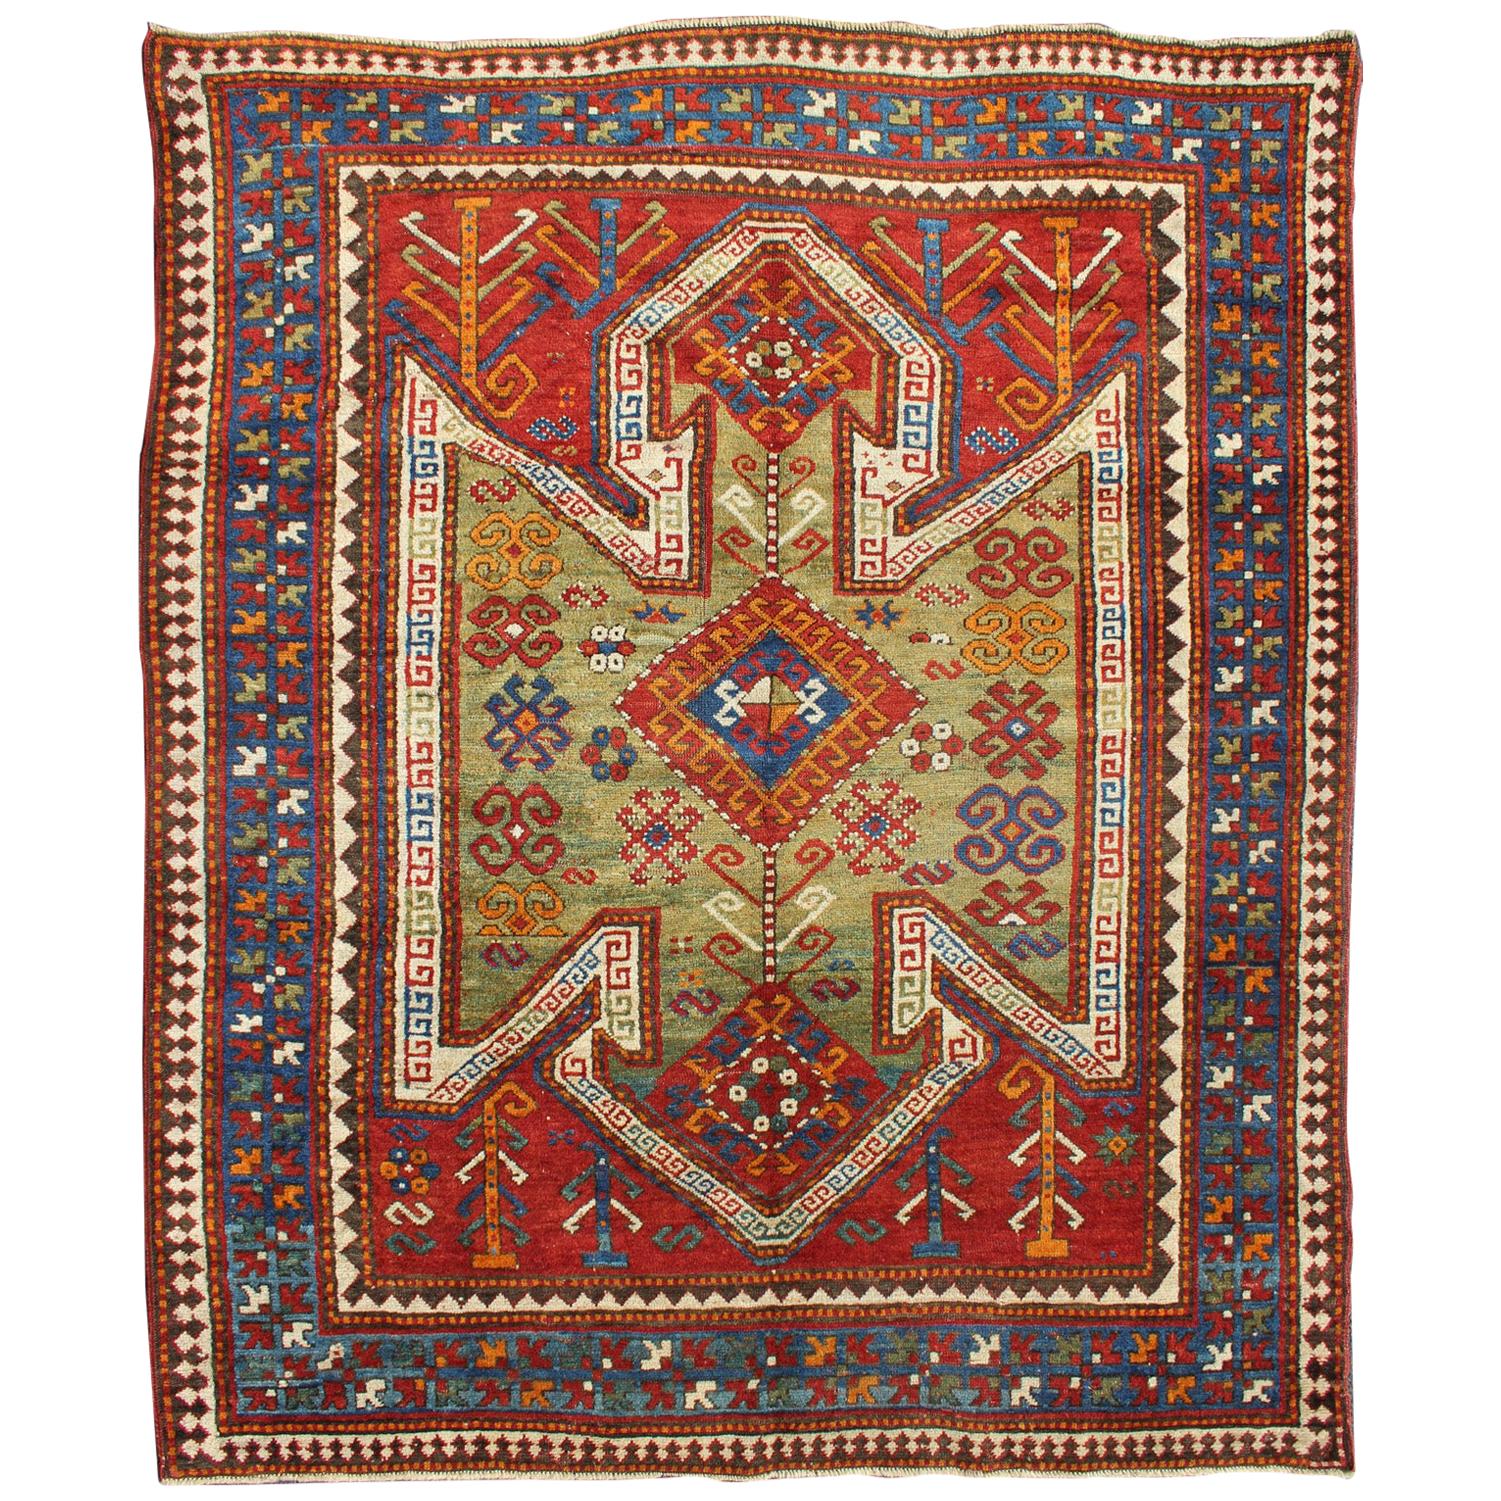 Antique Caucasian Sewan Kazak Rug with Large-Scale Tribal Design in Red & Green